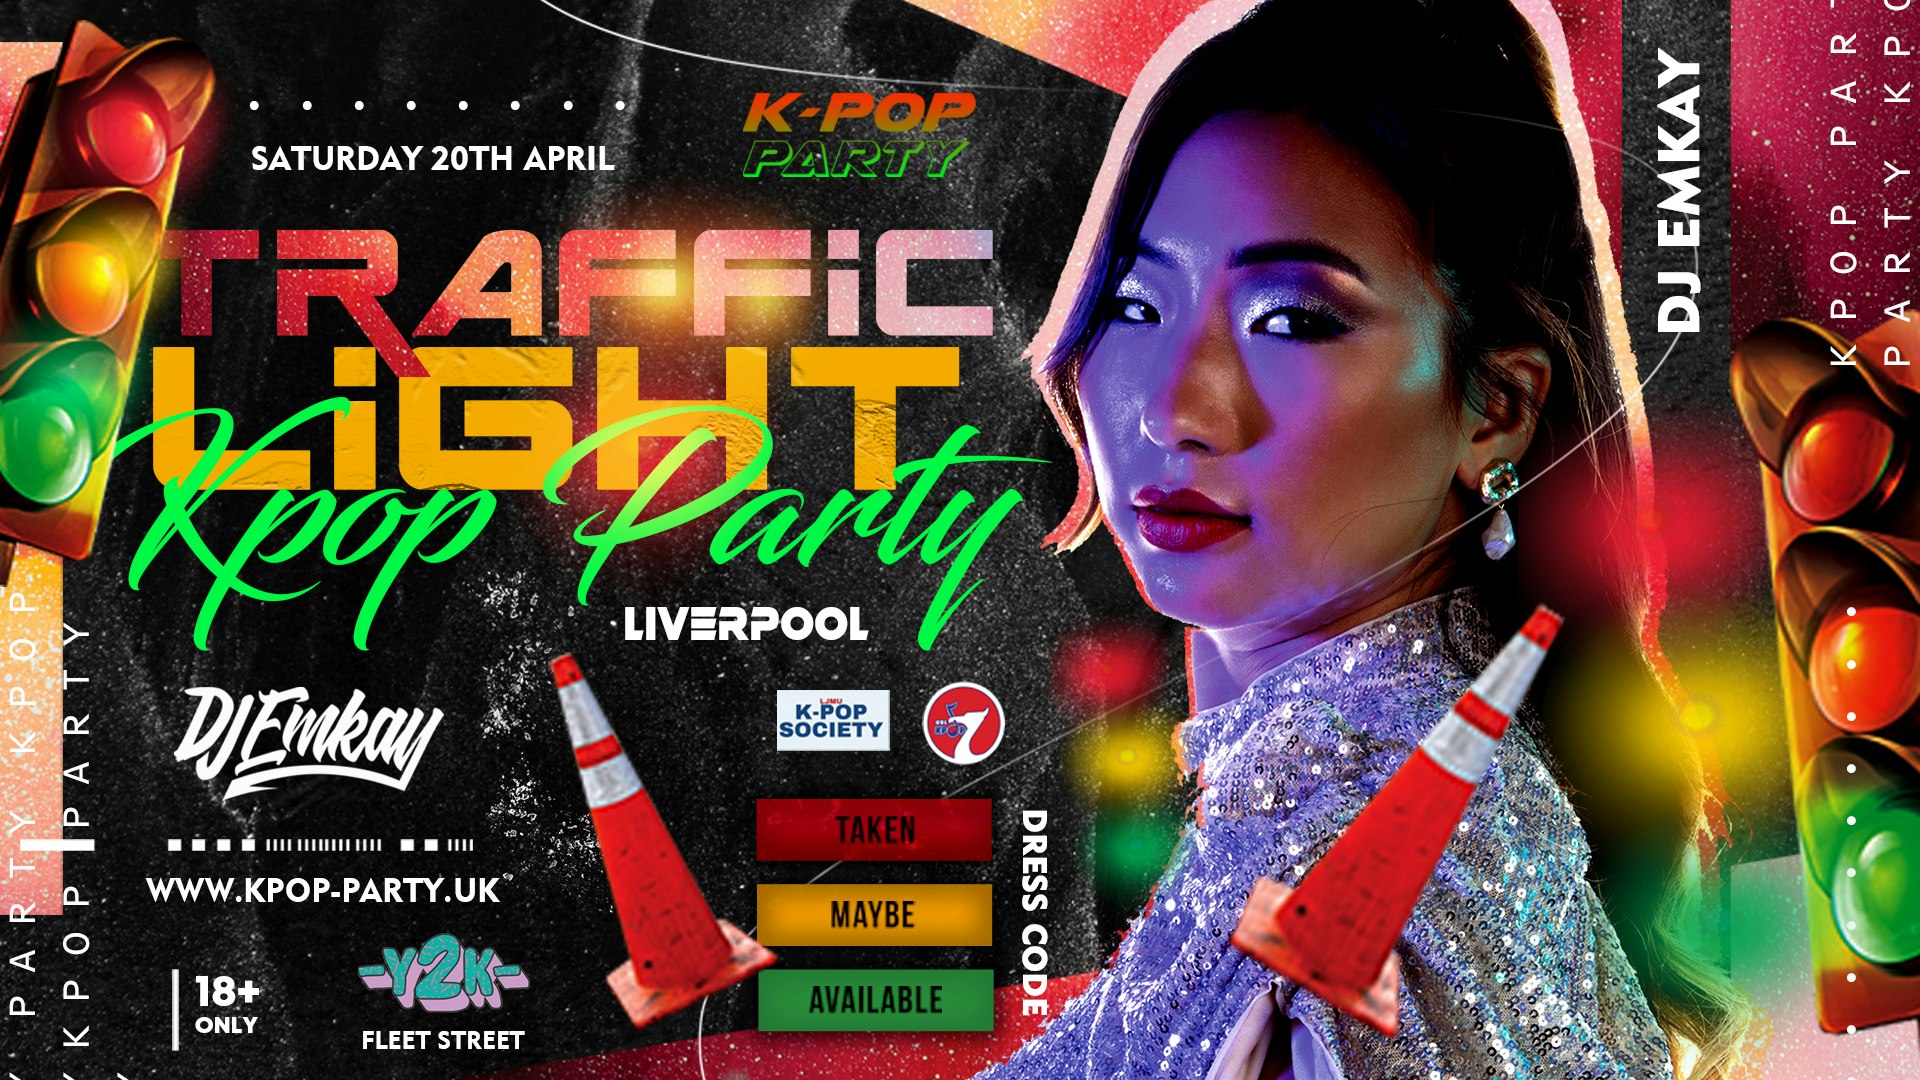 K-Pop TRAFFIC LIGHT PARTY Party Liverpool with DJ EMKAY | Saturday 20th April